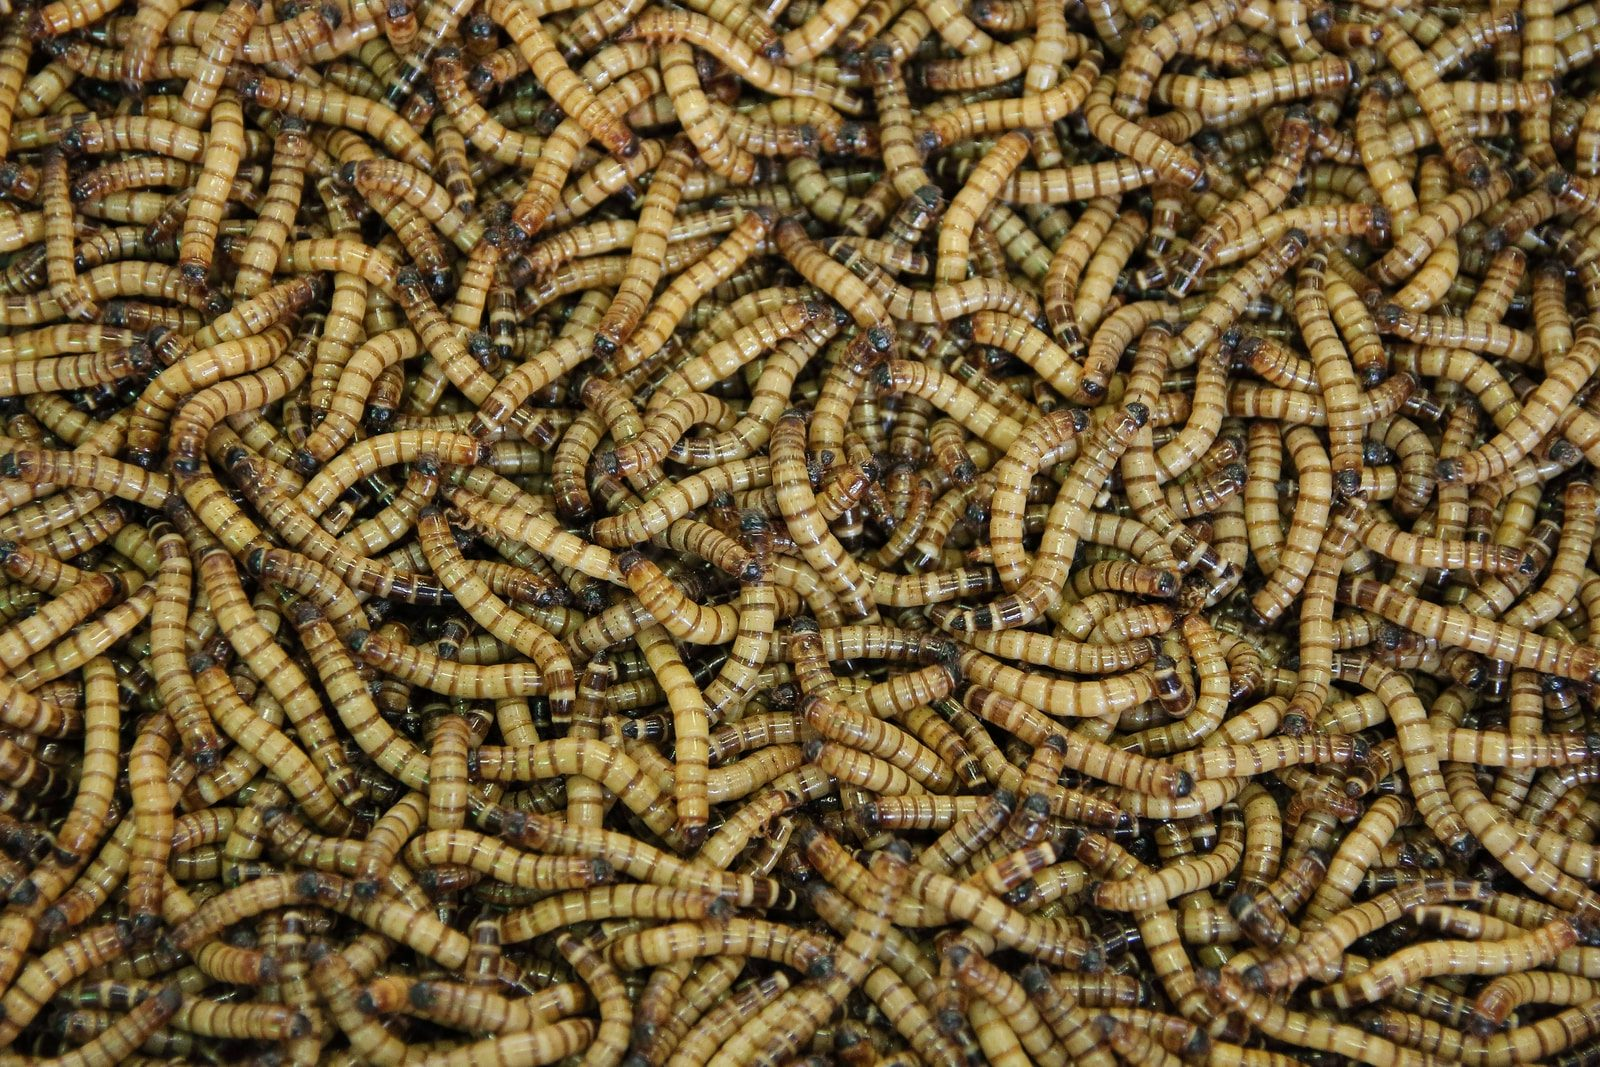 Mealworm protein drying